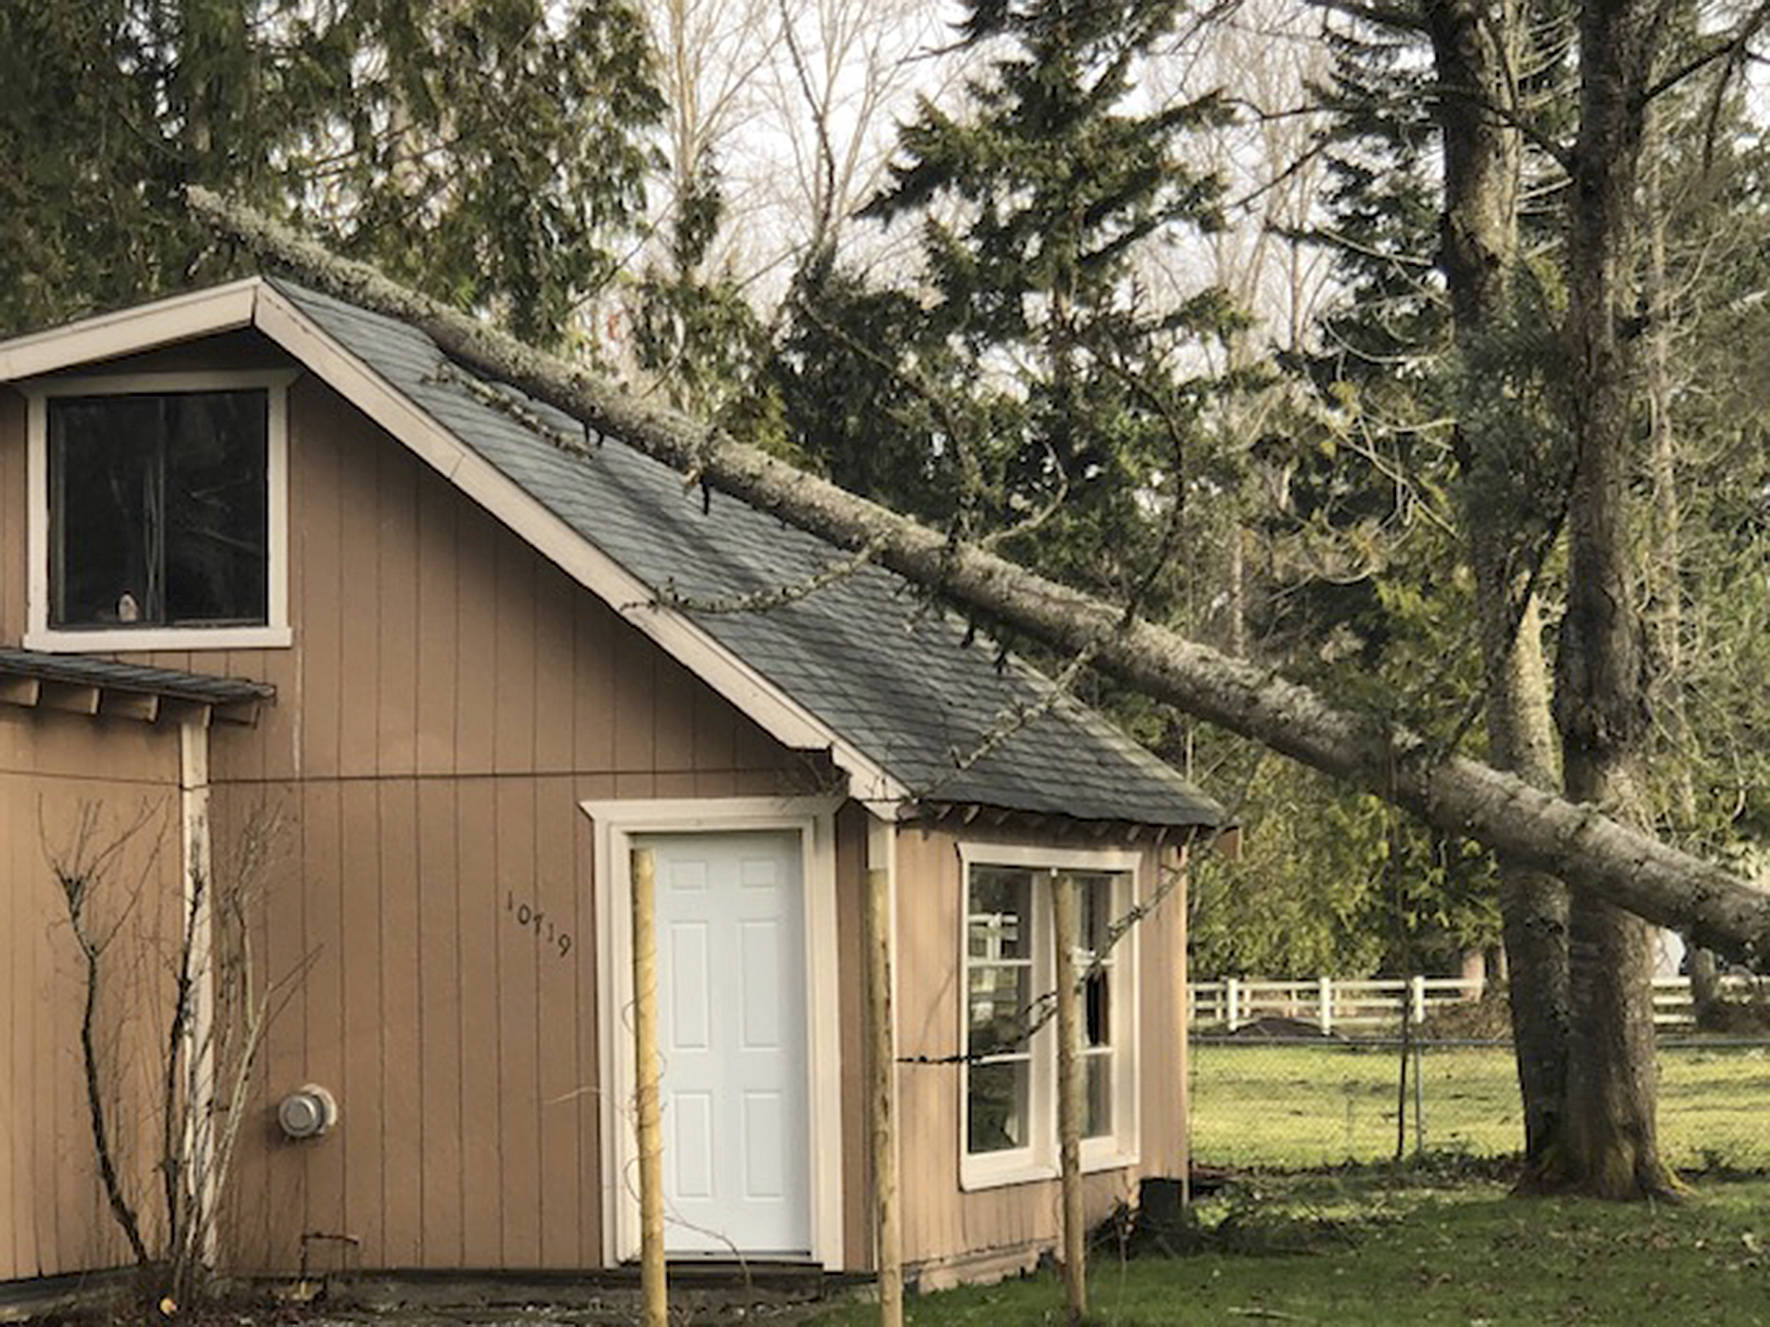 Bethany Alvarado, a Maple Valley resident, had a tree fall onto her home during the windstorm Jan. 6. Submitted photo from Bethany Alvarado